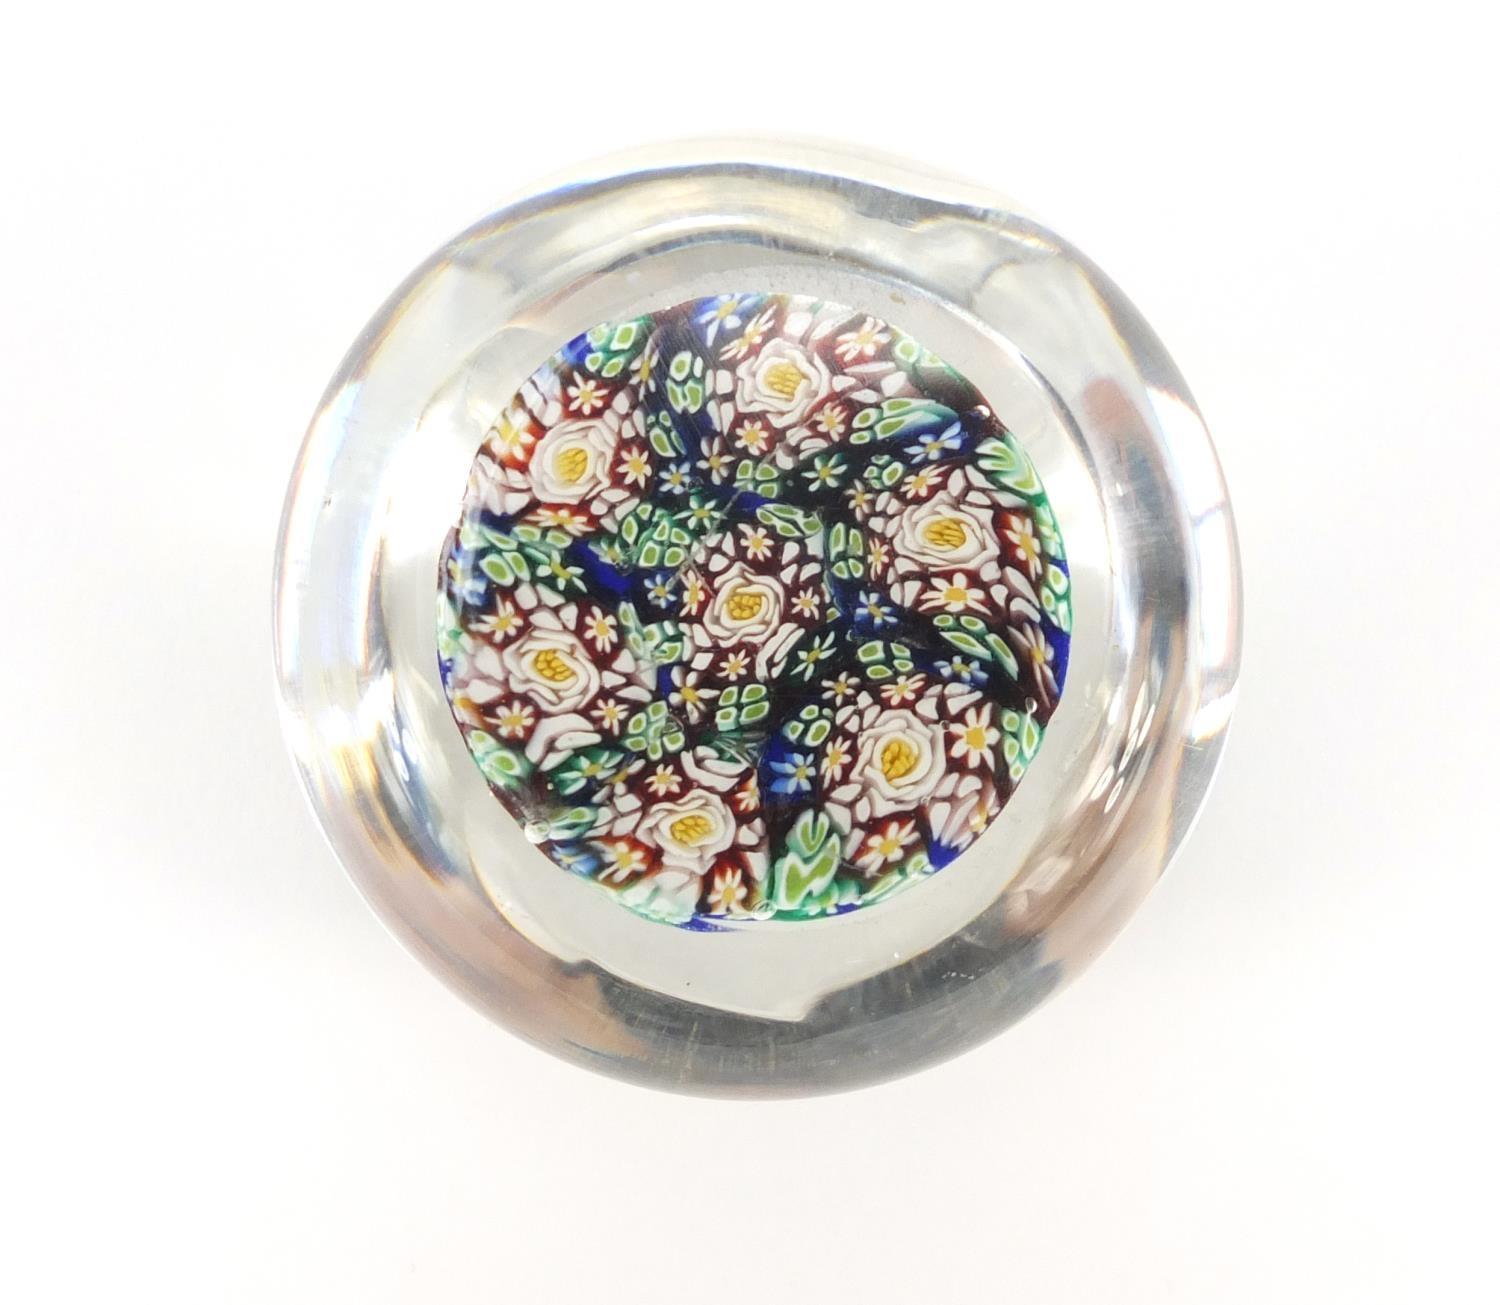 Millefiori glass paperweight, 5cm in diameter : For Further Condition Reports Please Visit Our - Image 6 of 6